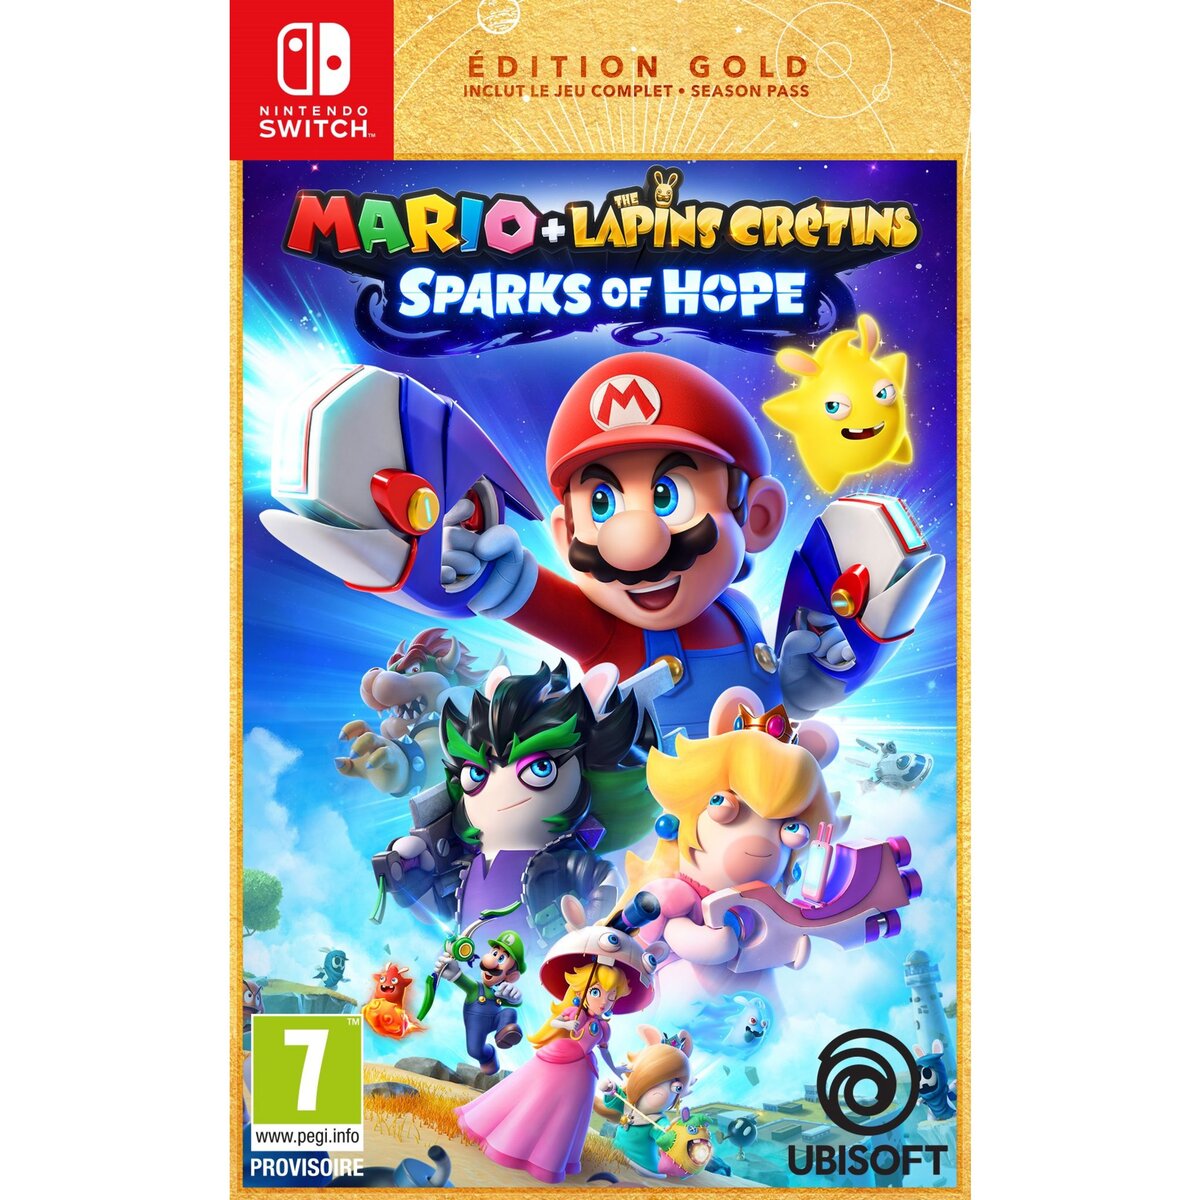 Mario + The Lapins Crétins Sparks of Hope Gold Nintendo Switch